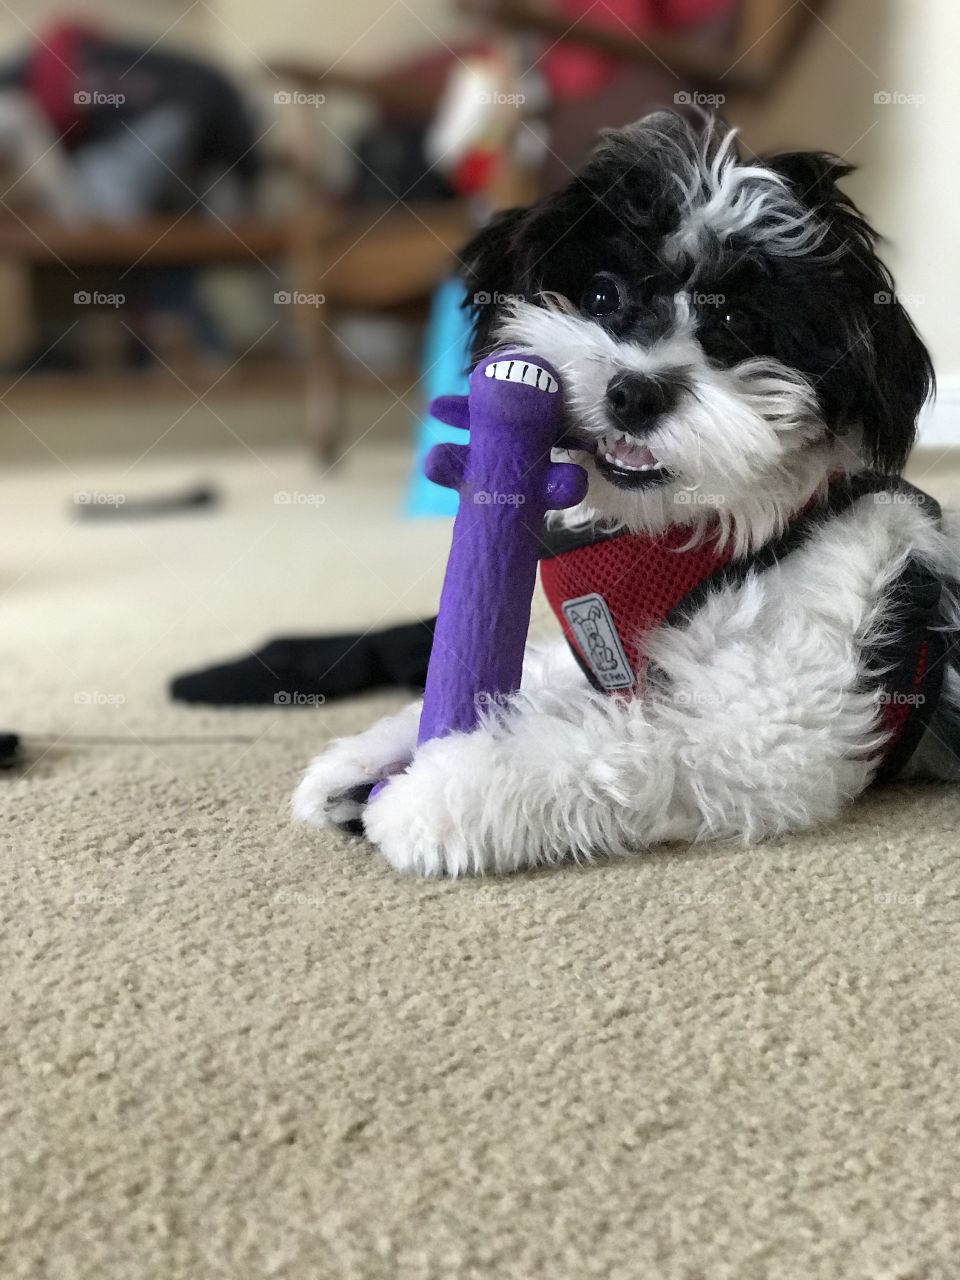 Little Scamp the Havanese cheesin’ with his favorite squeaky toy in a suburban home. 